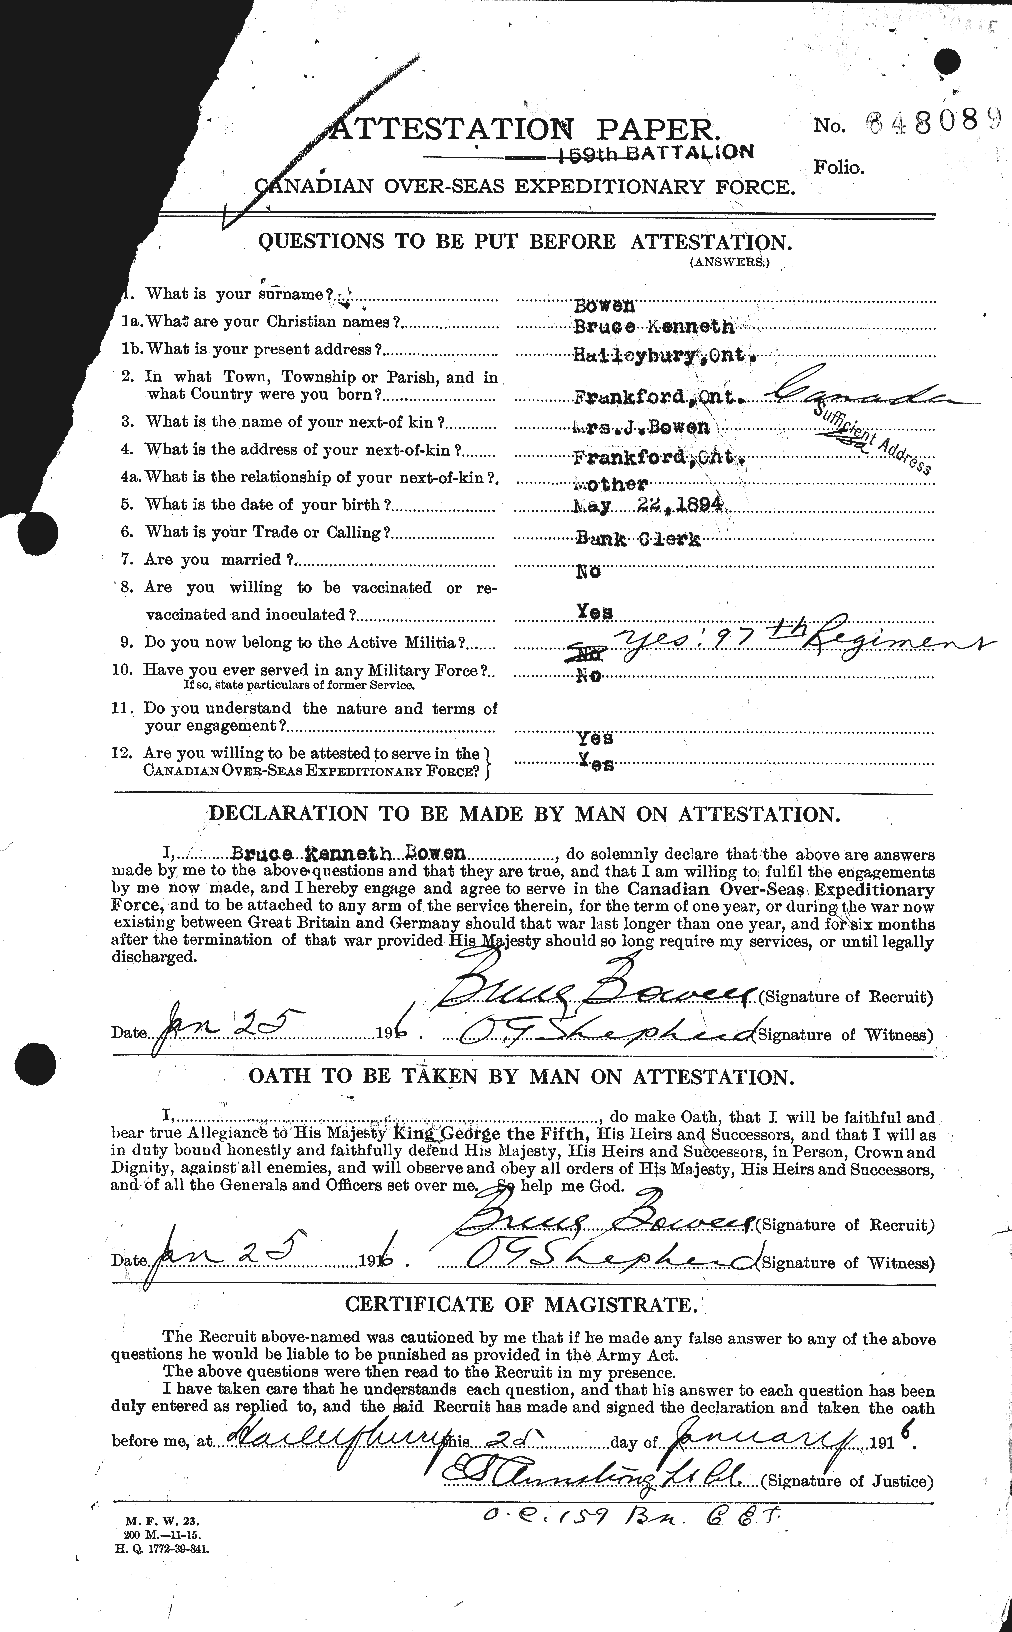 Personnel Records of the First World War - CEF 255359a